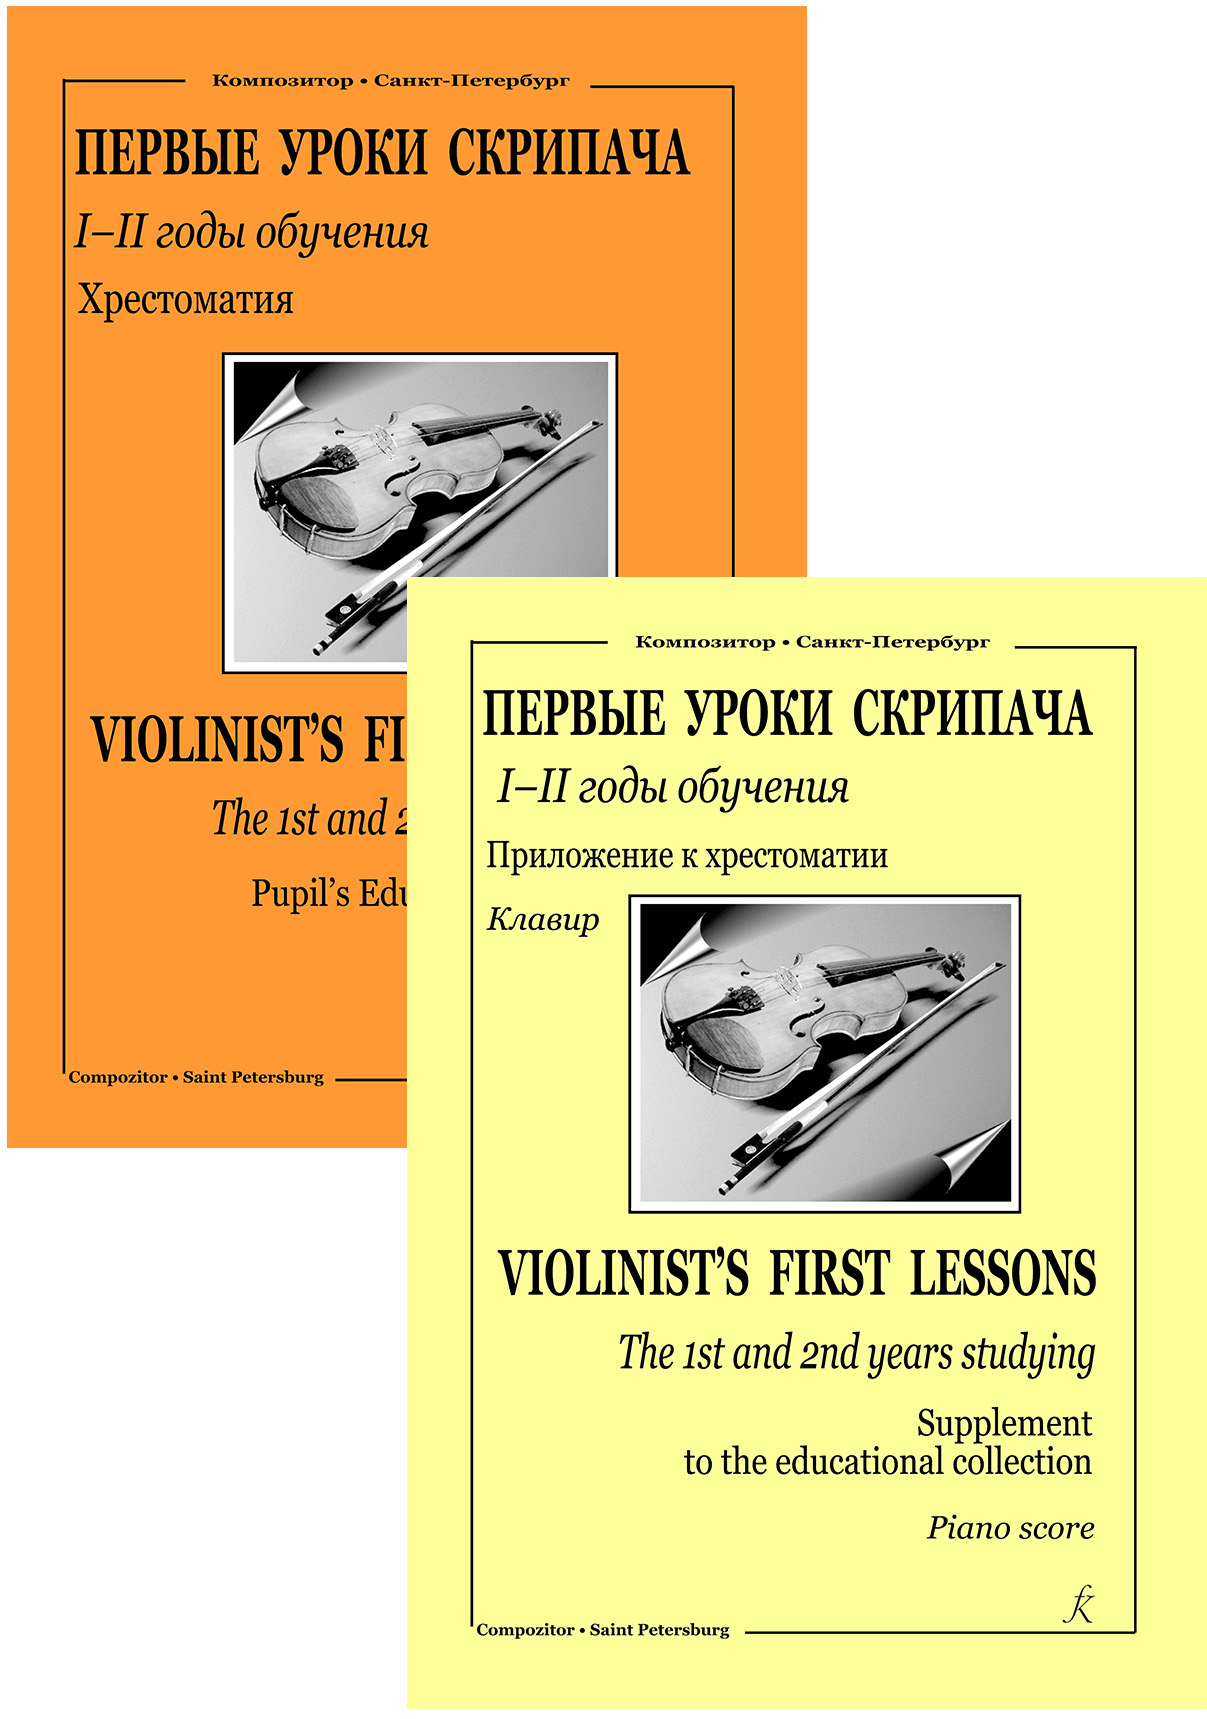 Violin. Educational Collection. 1–2 years studying. Piano score and part